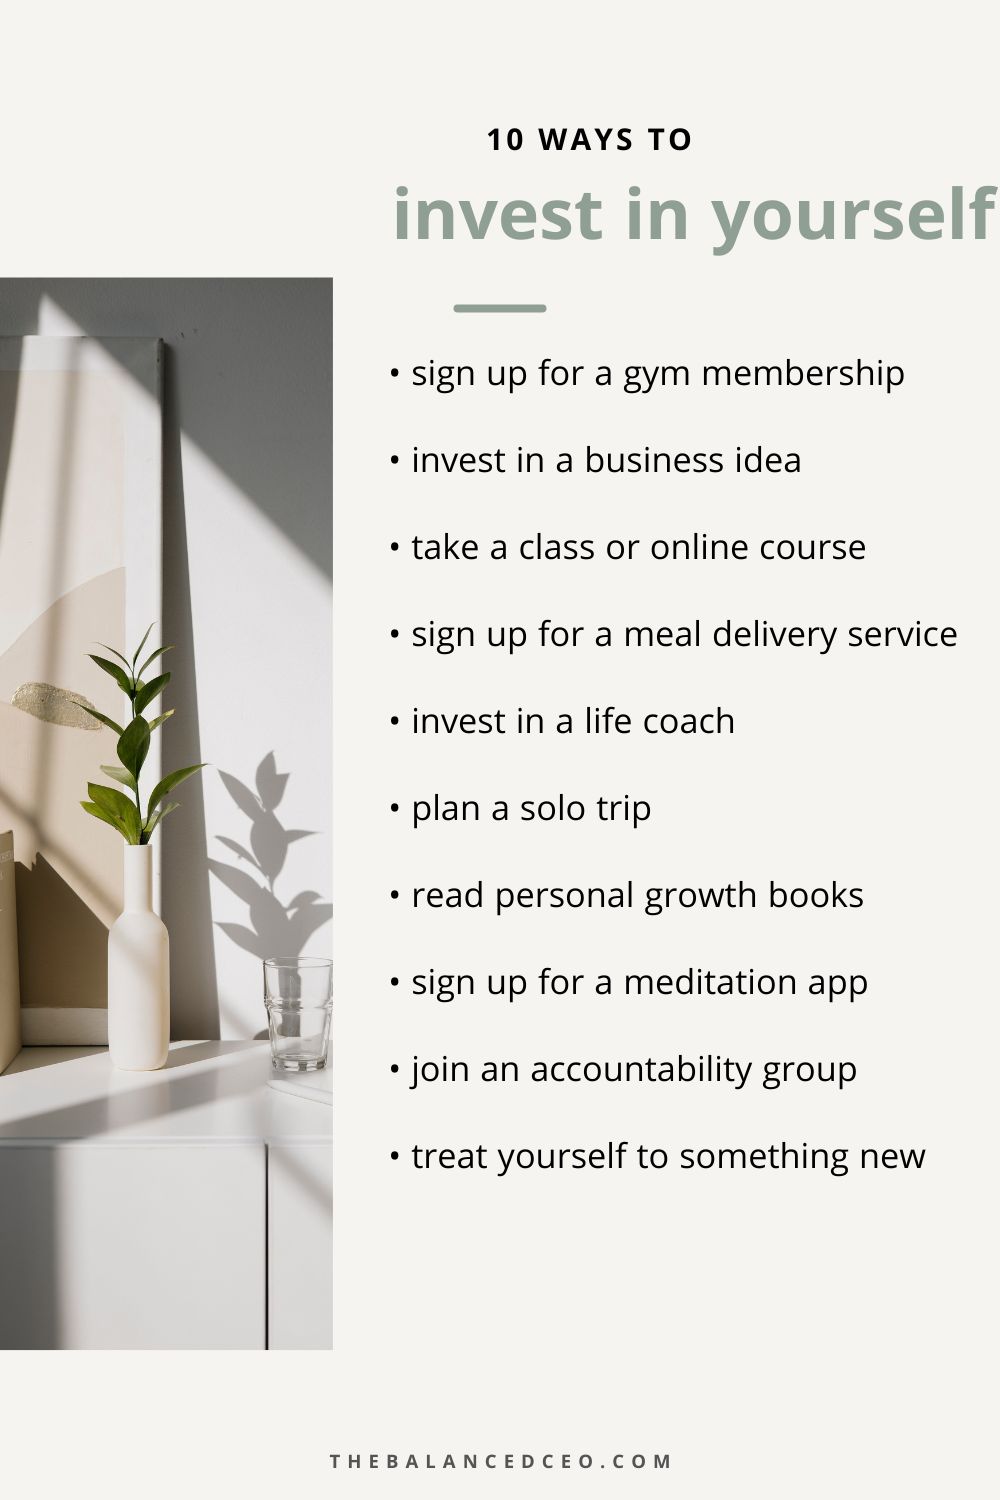 10 Ways to Invest in Yourself Today